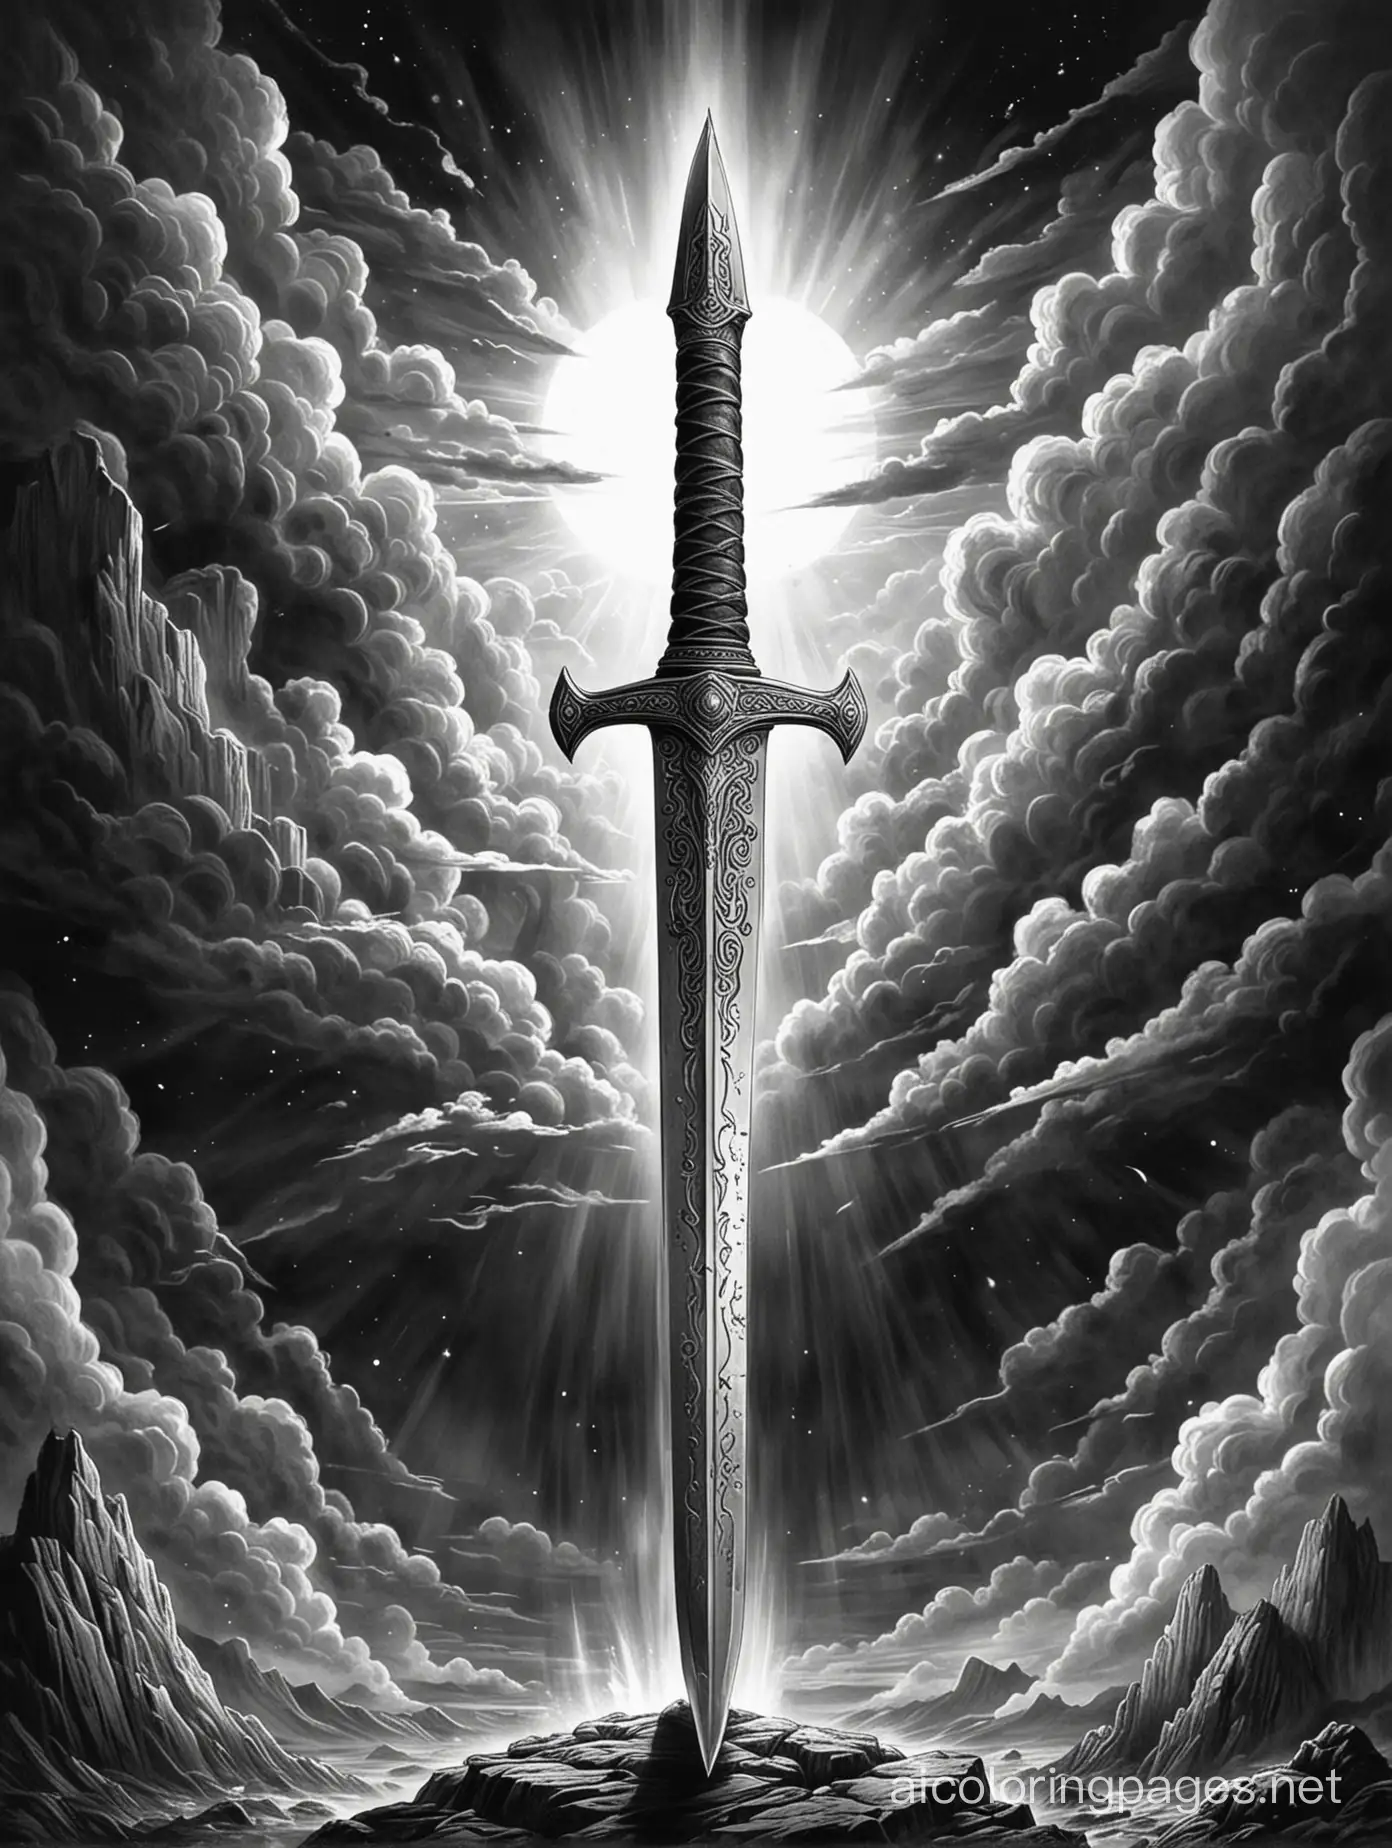 ((black and white illustration)) a sword ((the sharp point of the sword is pointing at the top of the page)) emiting bright light in all directions, in the middle of a gloomy dark sky,  ((darkness is fleeing from the sword)), Coloring Page, black and white, line art, white background, Simplicity, Ample White Space. The background of the coloring page is plain white to make it easy for young children to color within the lines. The outlines of all the subjects are easy to distinguish, making it simple for kids to color without too much difficulty